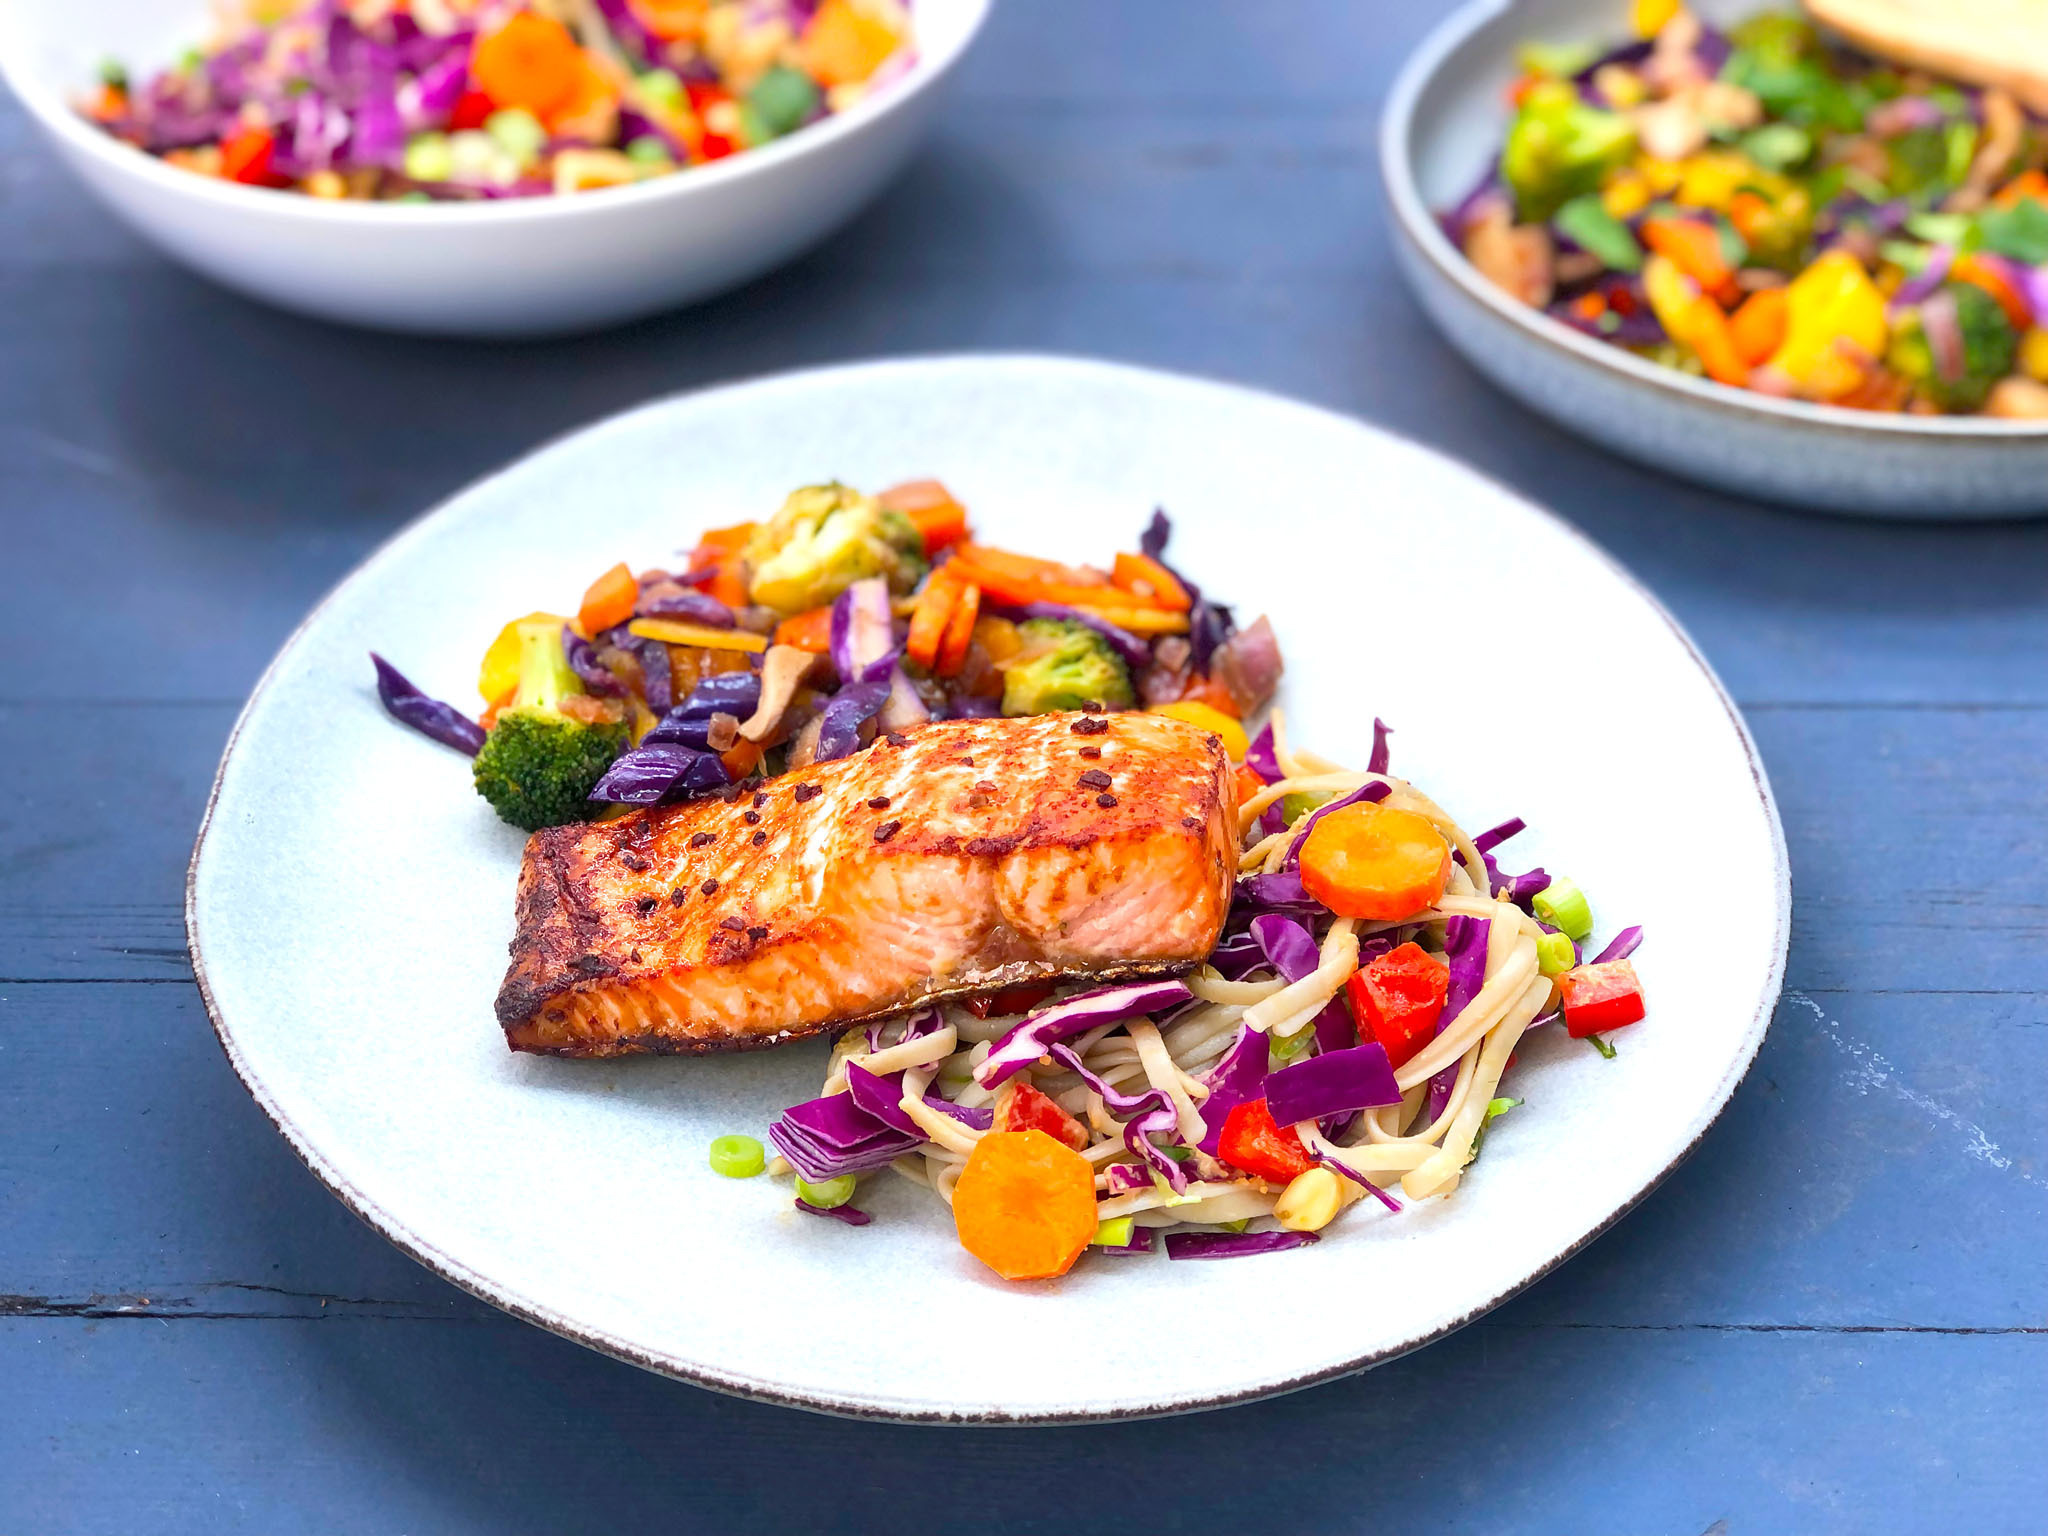 Thai Ginger Salmon, served with Vegetable Stir Fry and Noodle Salad with Peanut Sauce Image